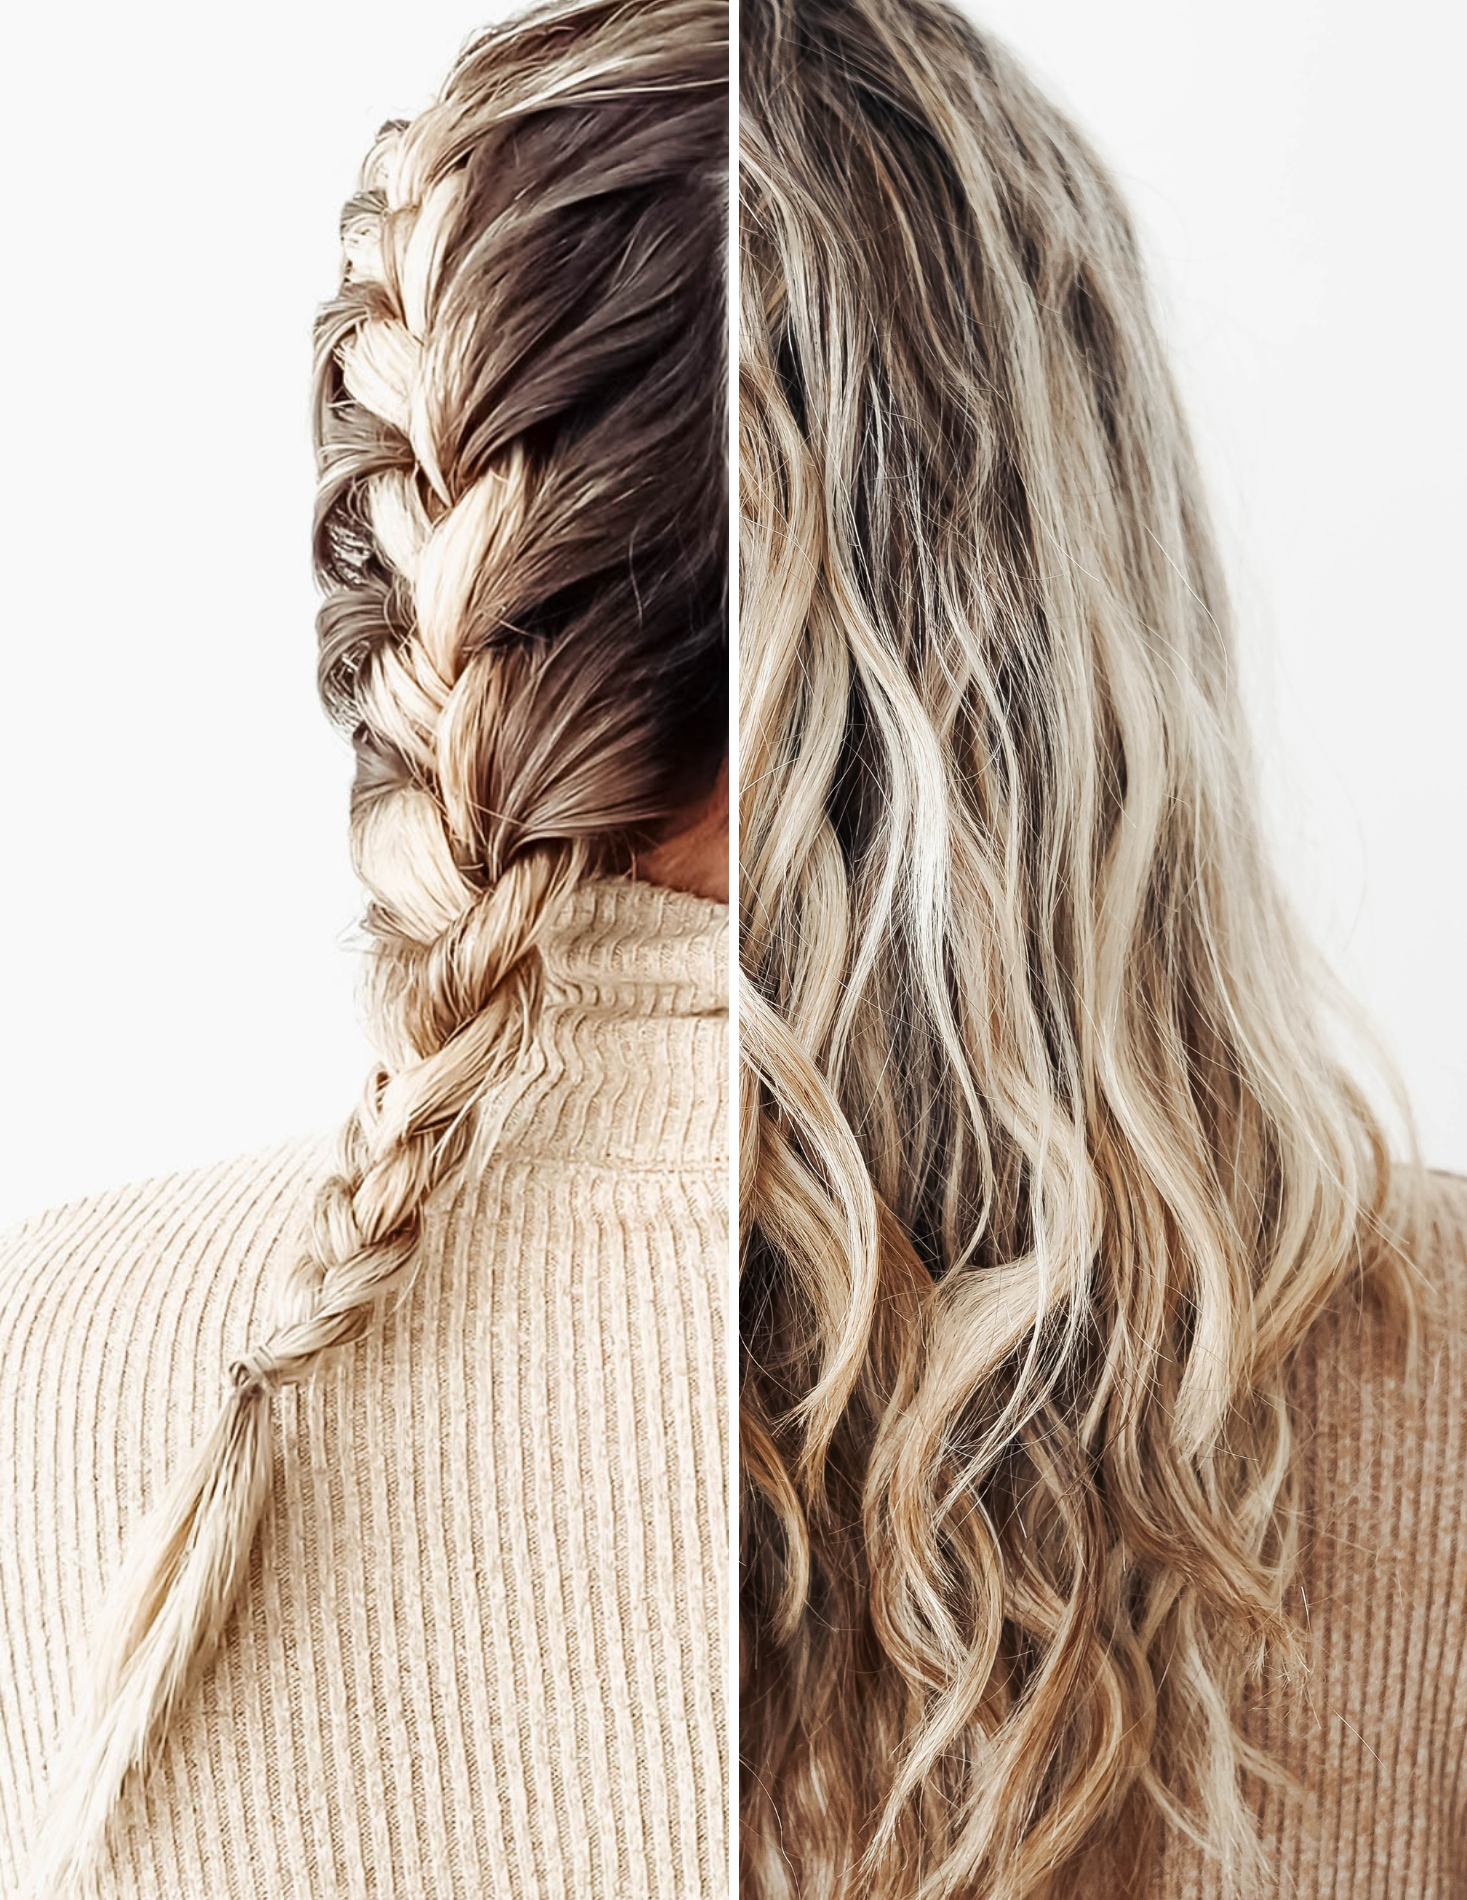 Half and half with braids is defo the style of the year 😍😍…. If you